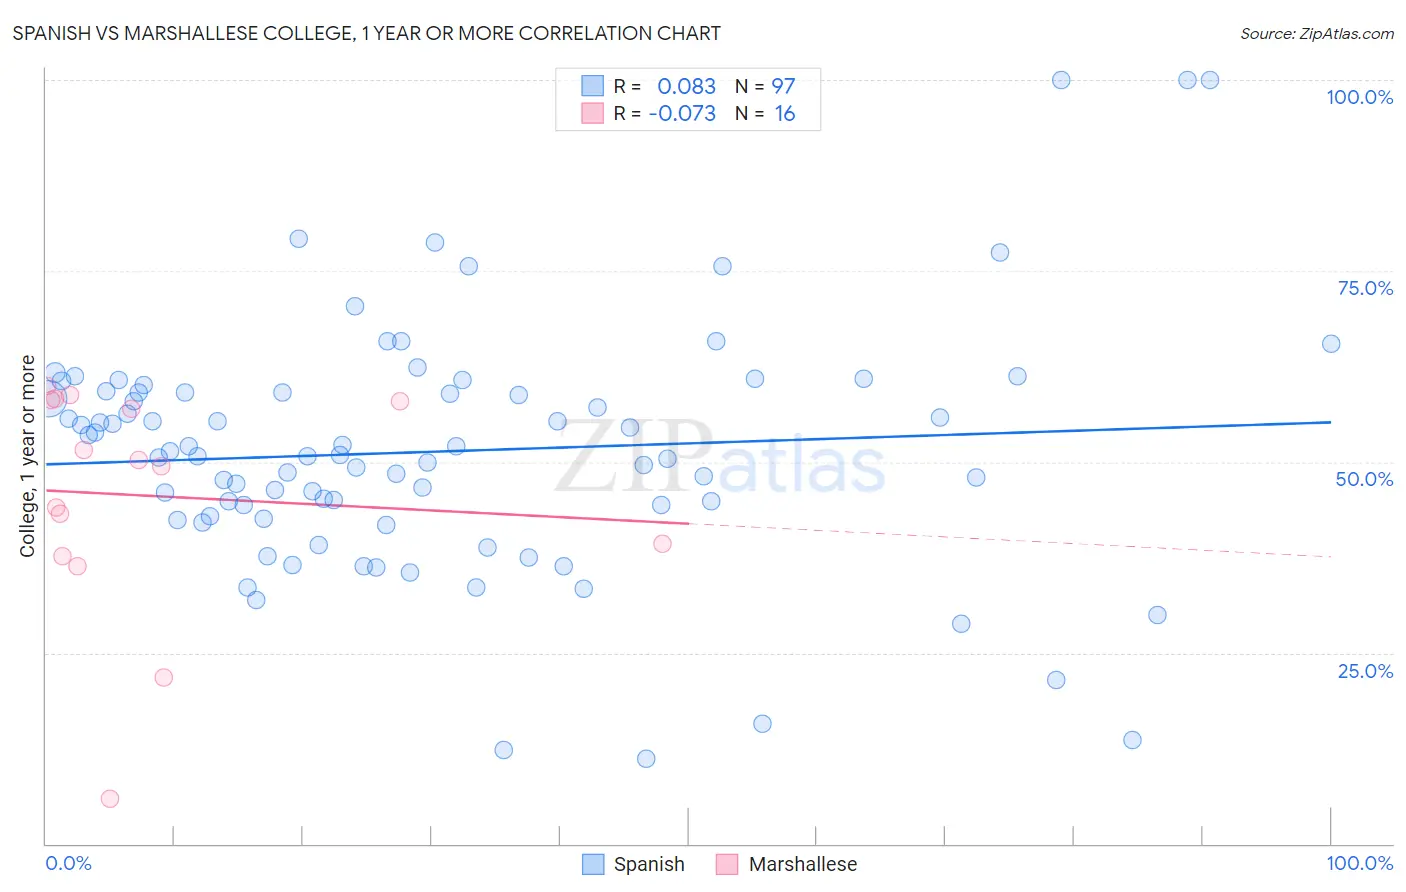 Spanish vs Marshallese College, 1 year or more